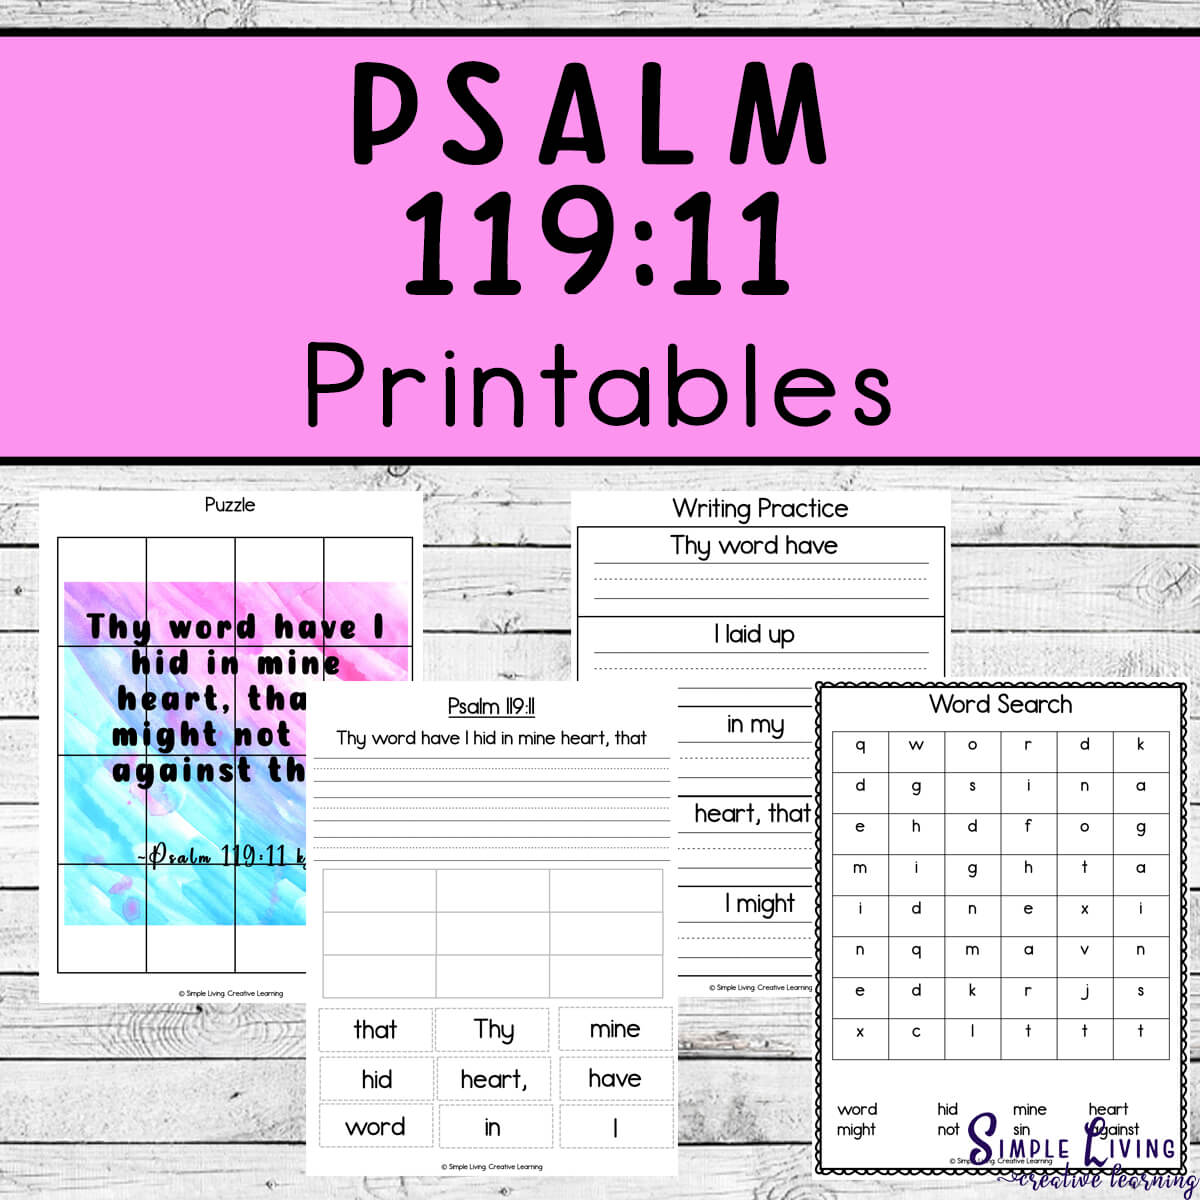 Psalm 119:11 Printables four pages